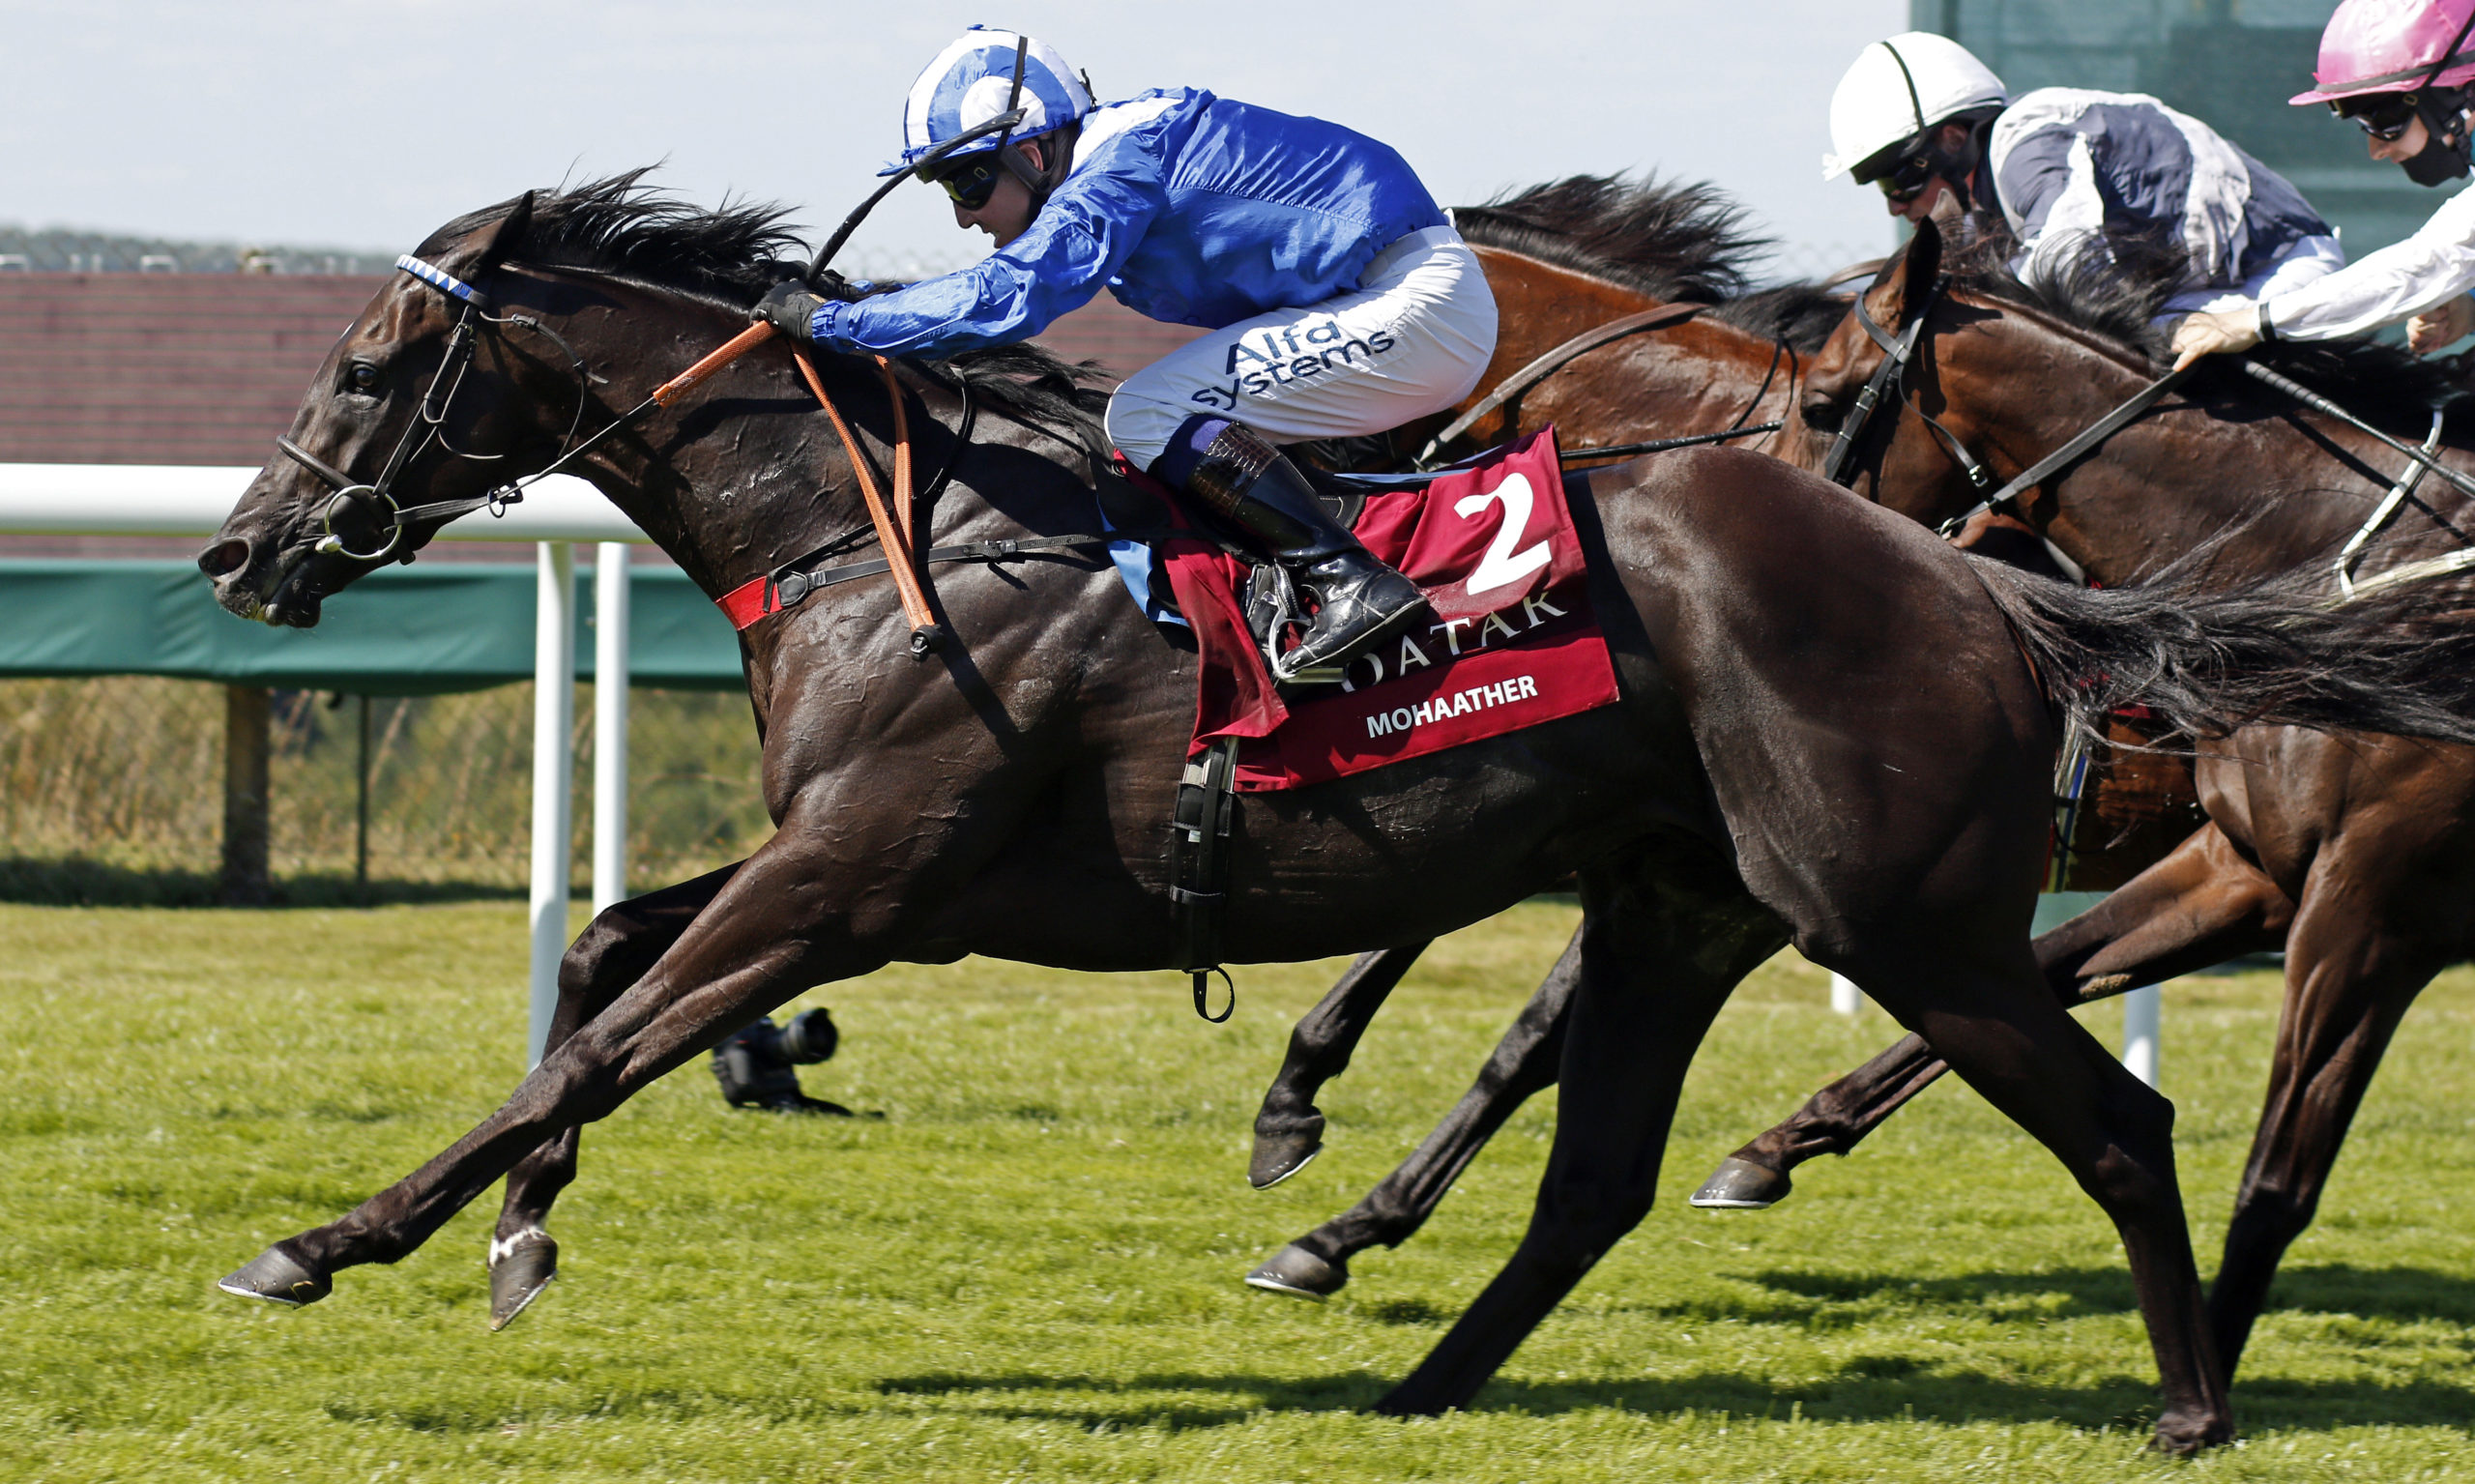 MOHAATHER (Jim Crowley) wins The Qatar Sussex StakesGoodwood 29 Jul 2020 - Pic Steven Cargill / Racingfotos.com